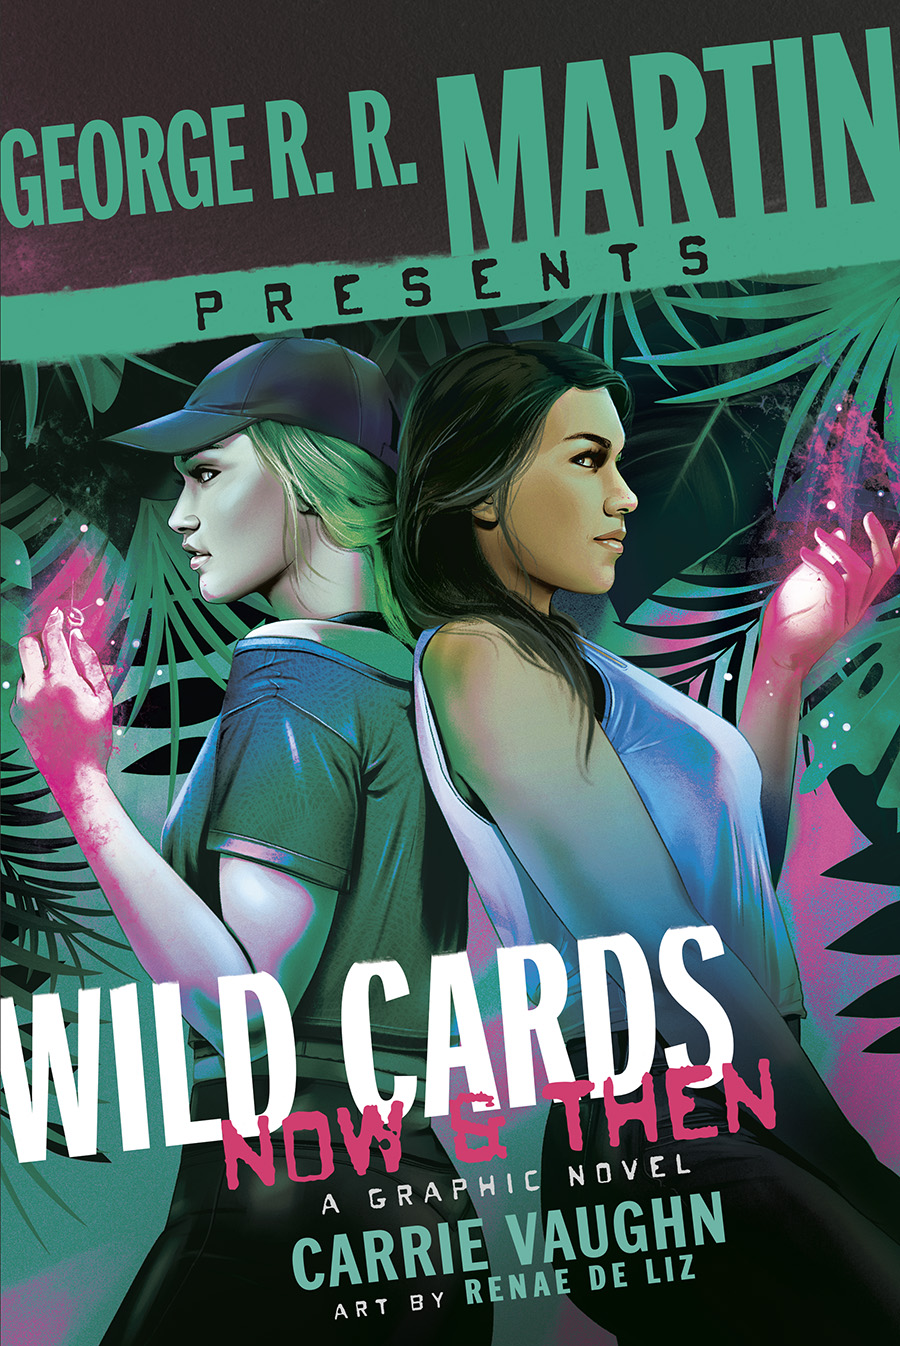 George RR Martin Presents Wild Cards Now And Then A Graphic Novel HC